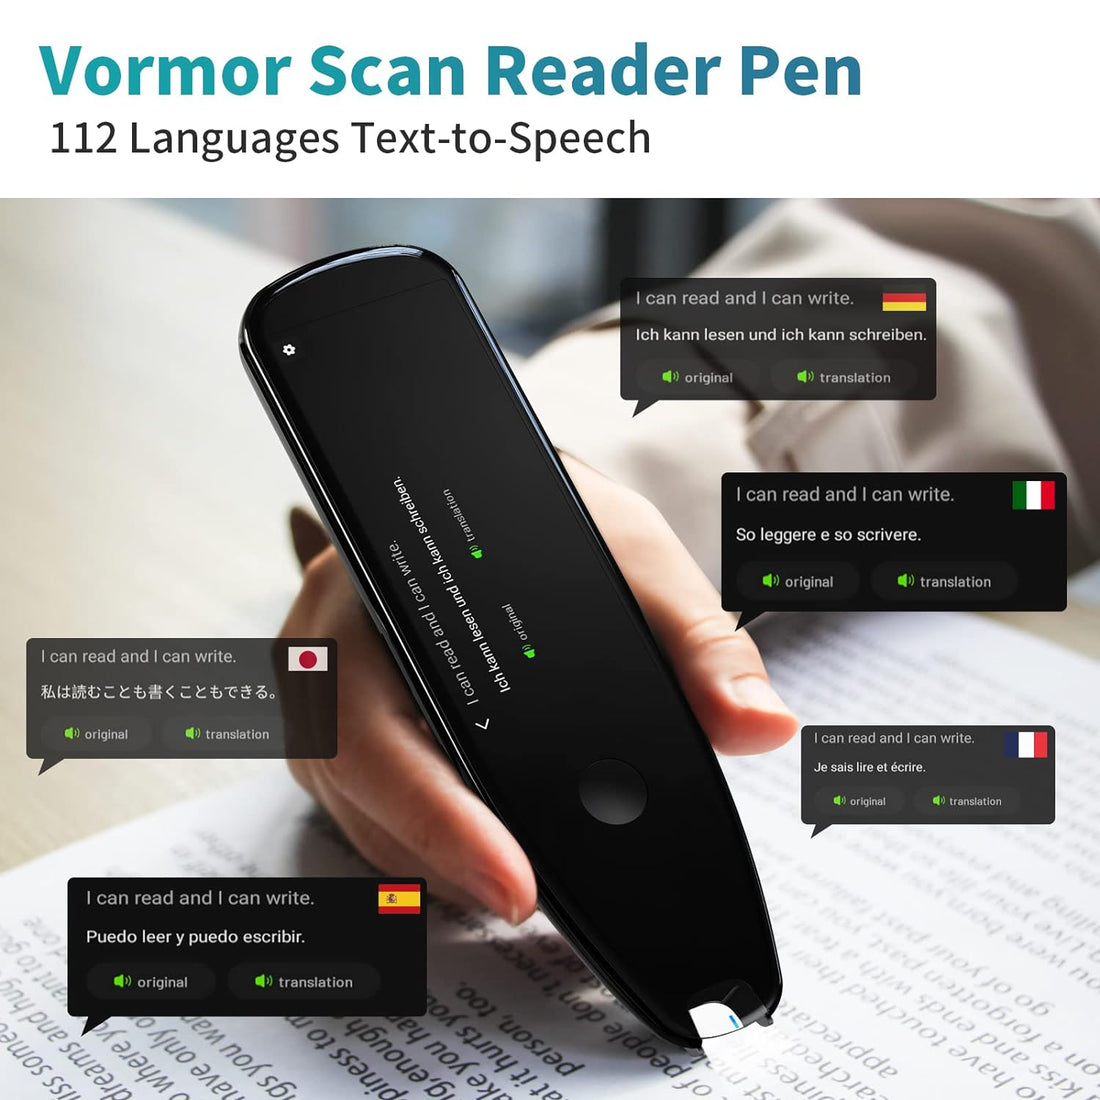 Adelagnes Reader Scanner Pen Dictionary Language Translator Device Real Time Support 112 Languages Voice Translator Text to Speech OCR/WiFi Translator Suitable for Meetings Travel Learning